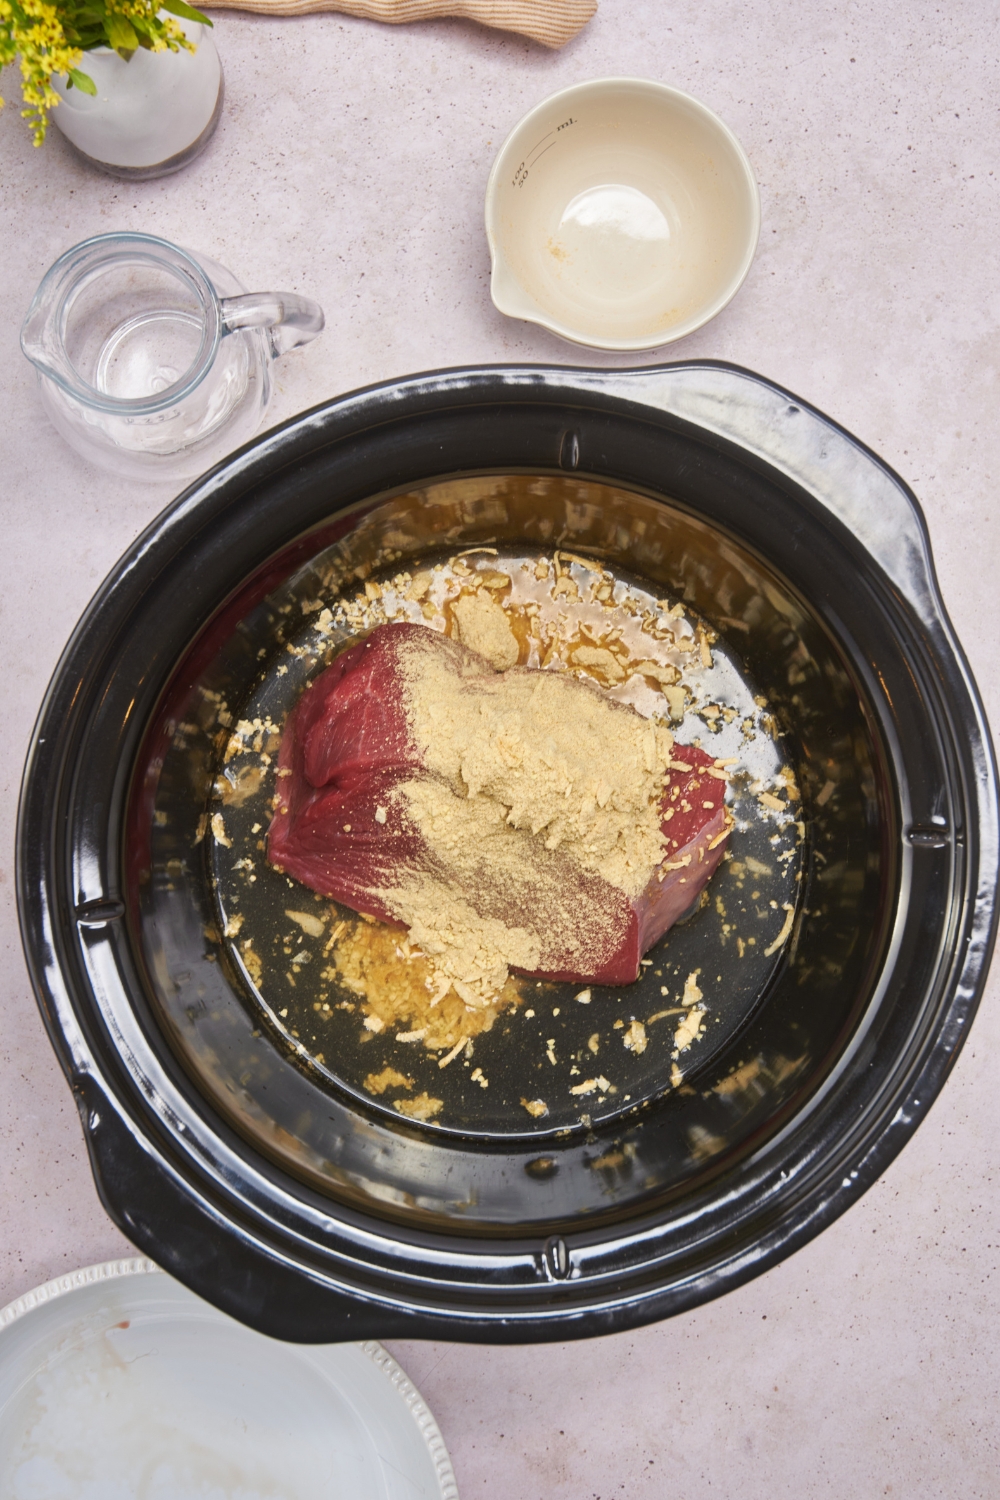 A crockpot filled with raw eye of round beef roast covered in dry onion soup mix.